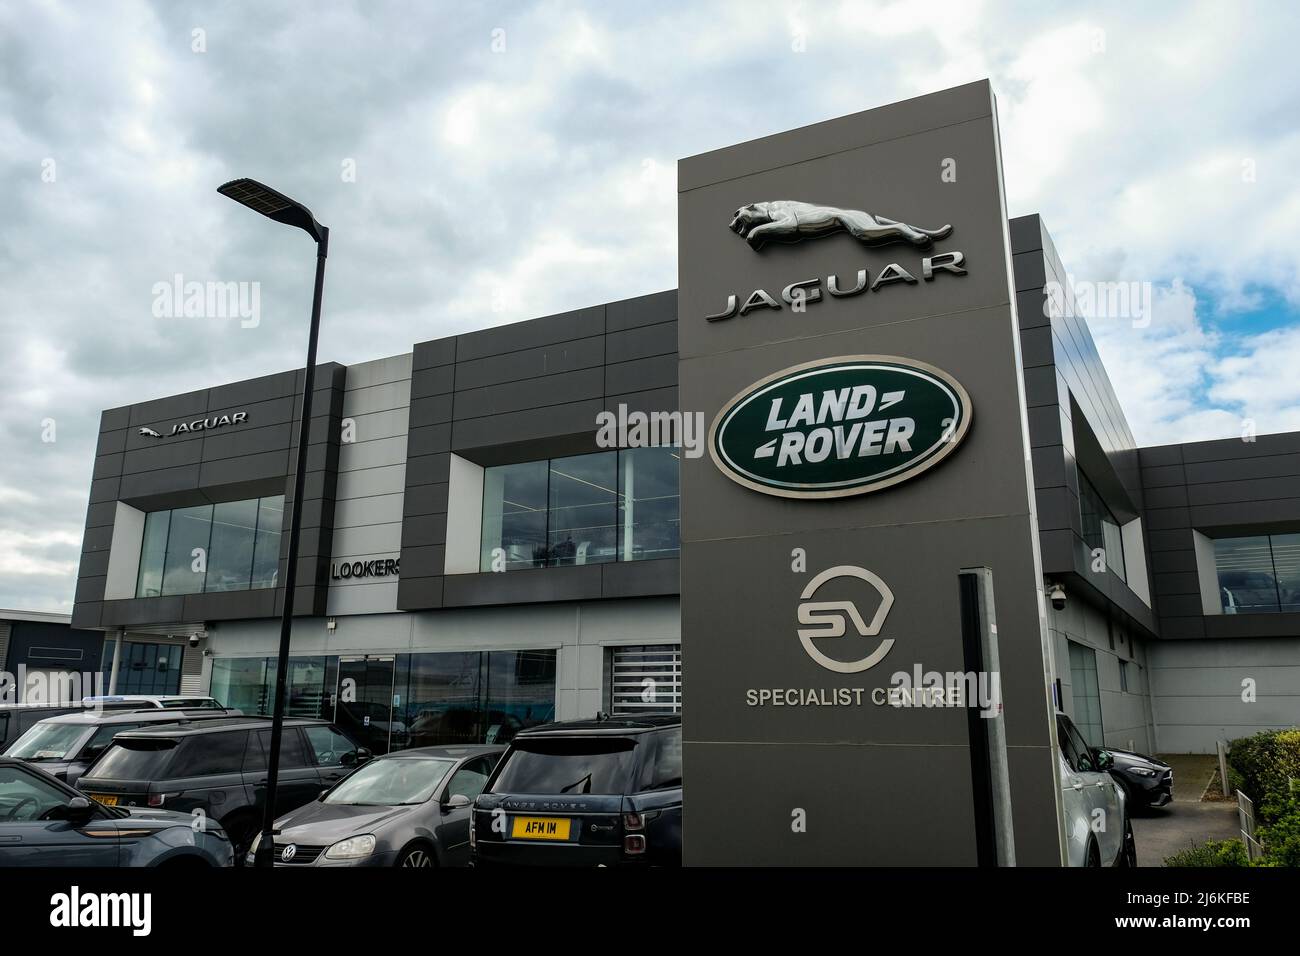 London- Land Rover car showroom in West London,  a British multinational automotive company. Stock Photo